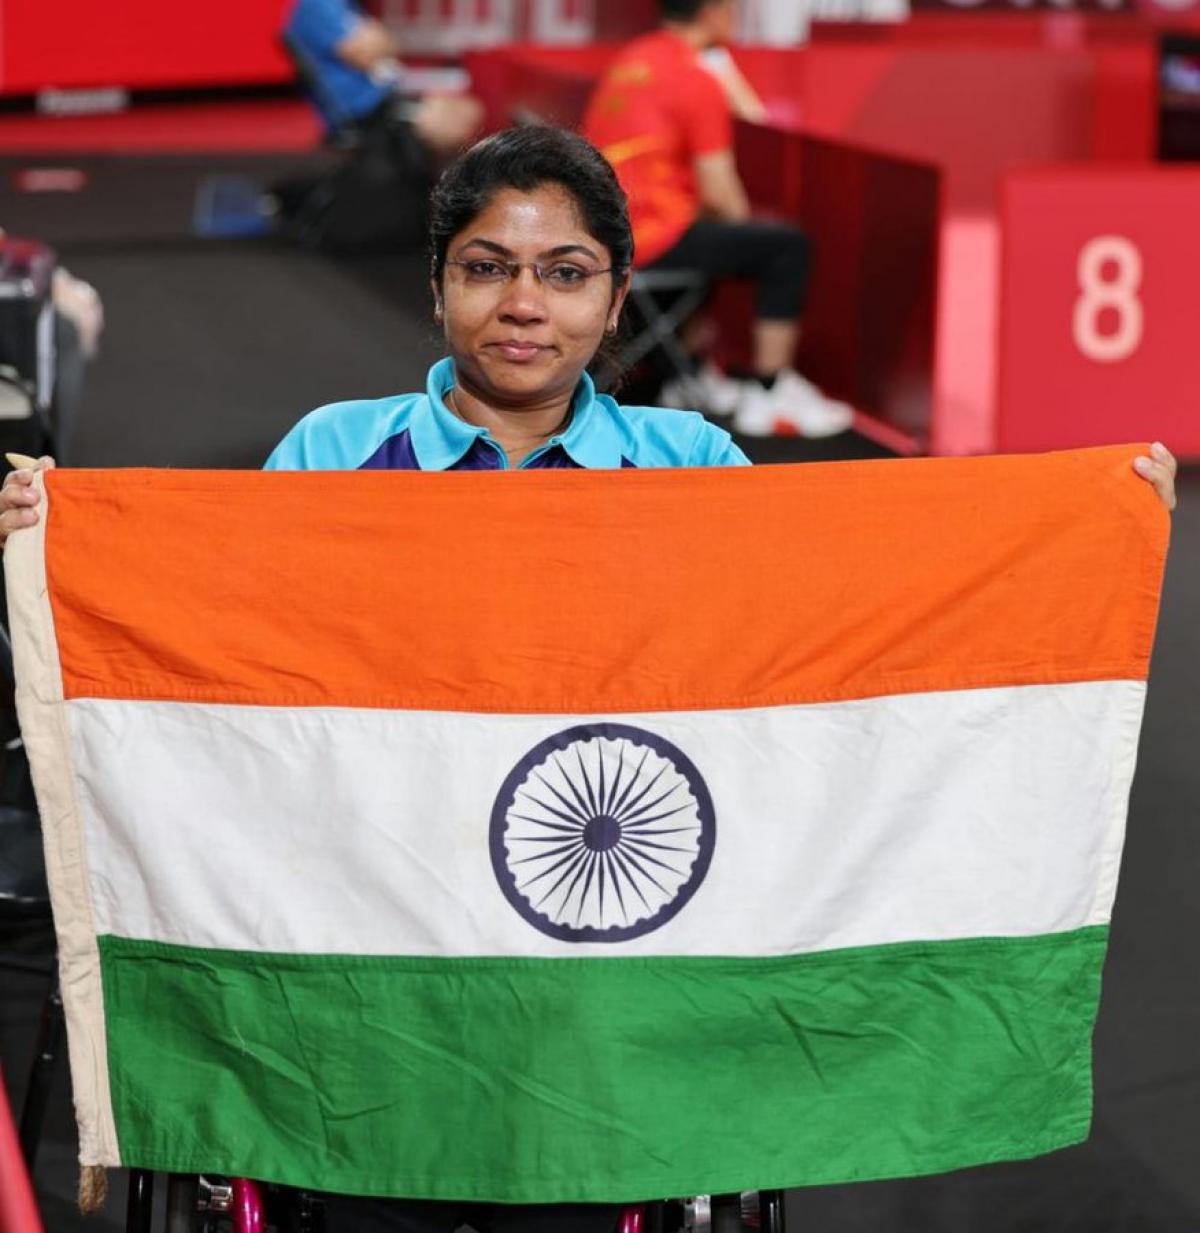 Bhavinaben Patel poses with the Indian flag after her historical performance